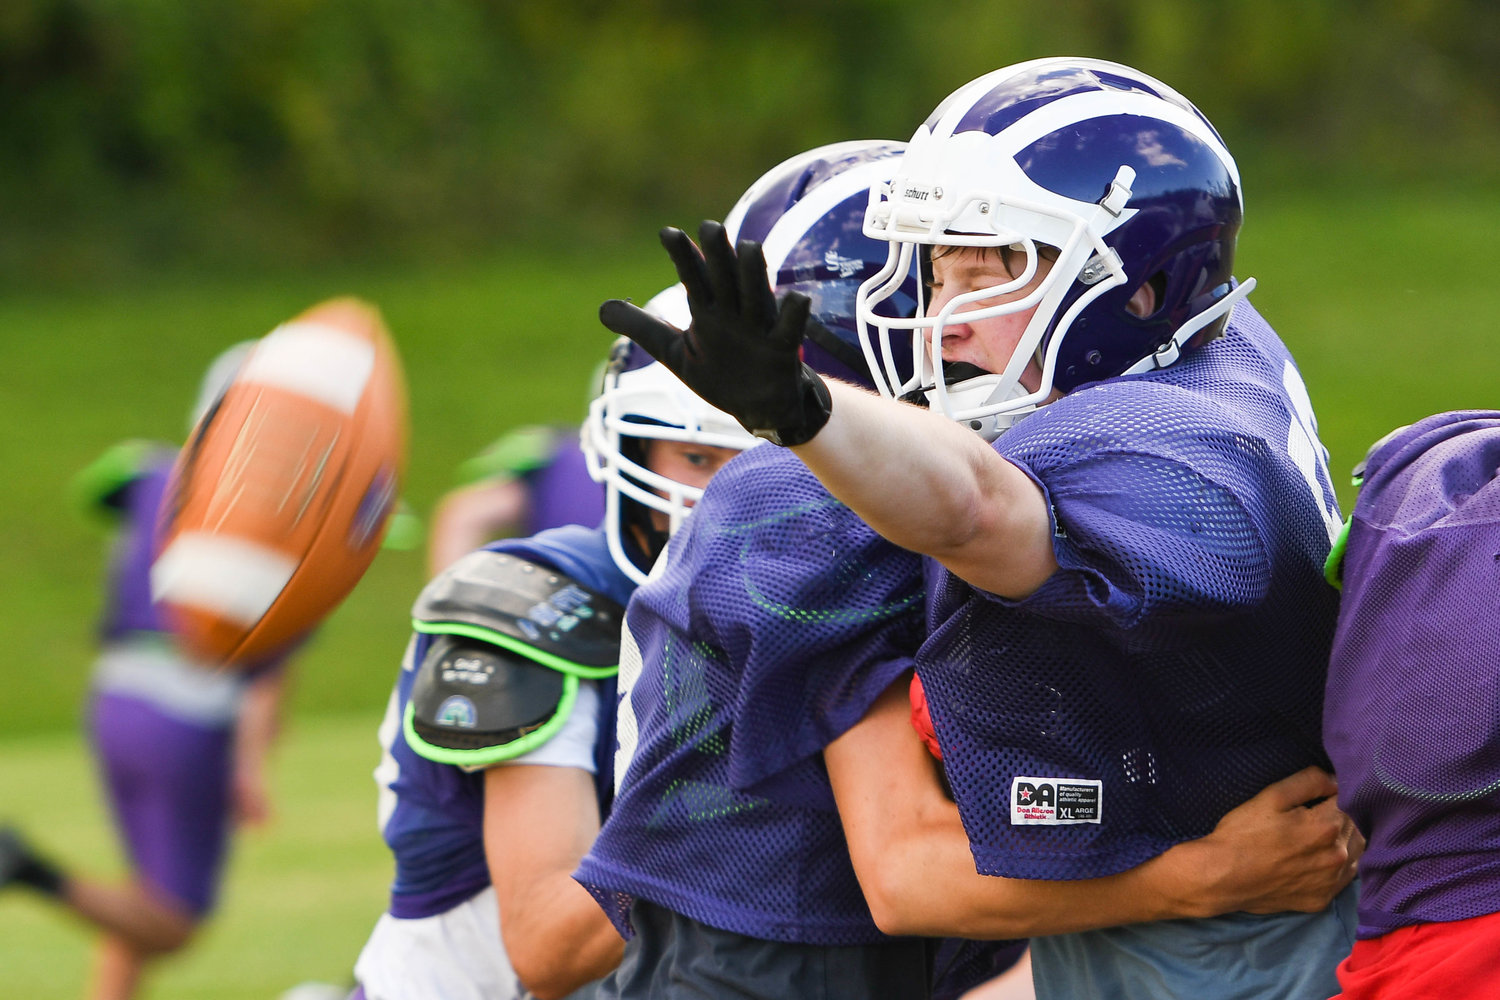 Little Falls senior lineman Dylan Mullen reaches out to block a punt during practice on Aug. 31.